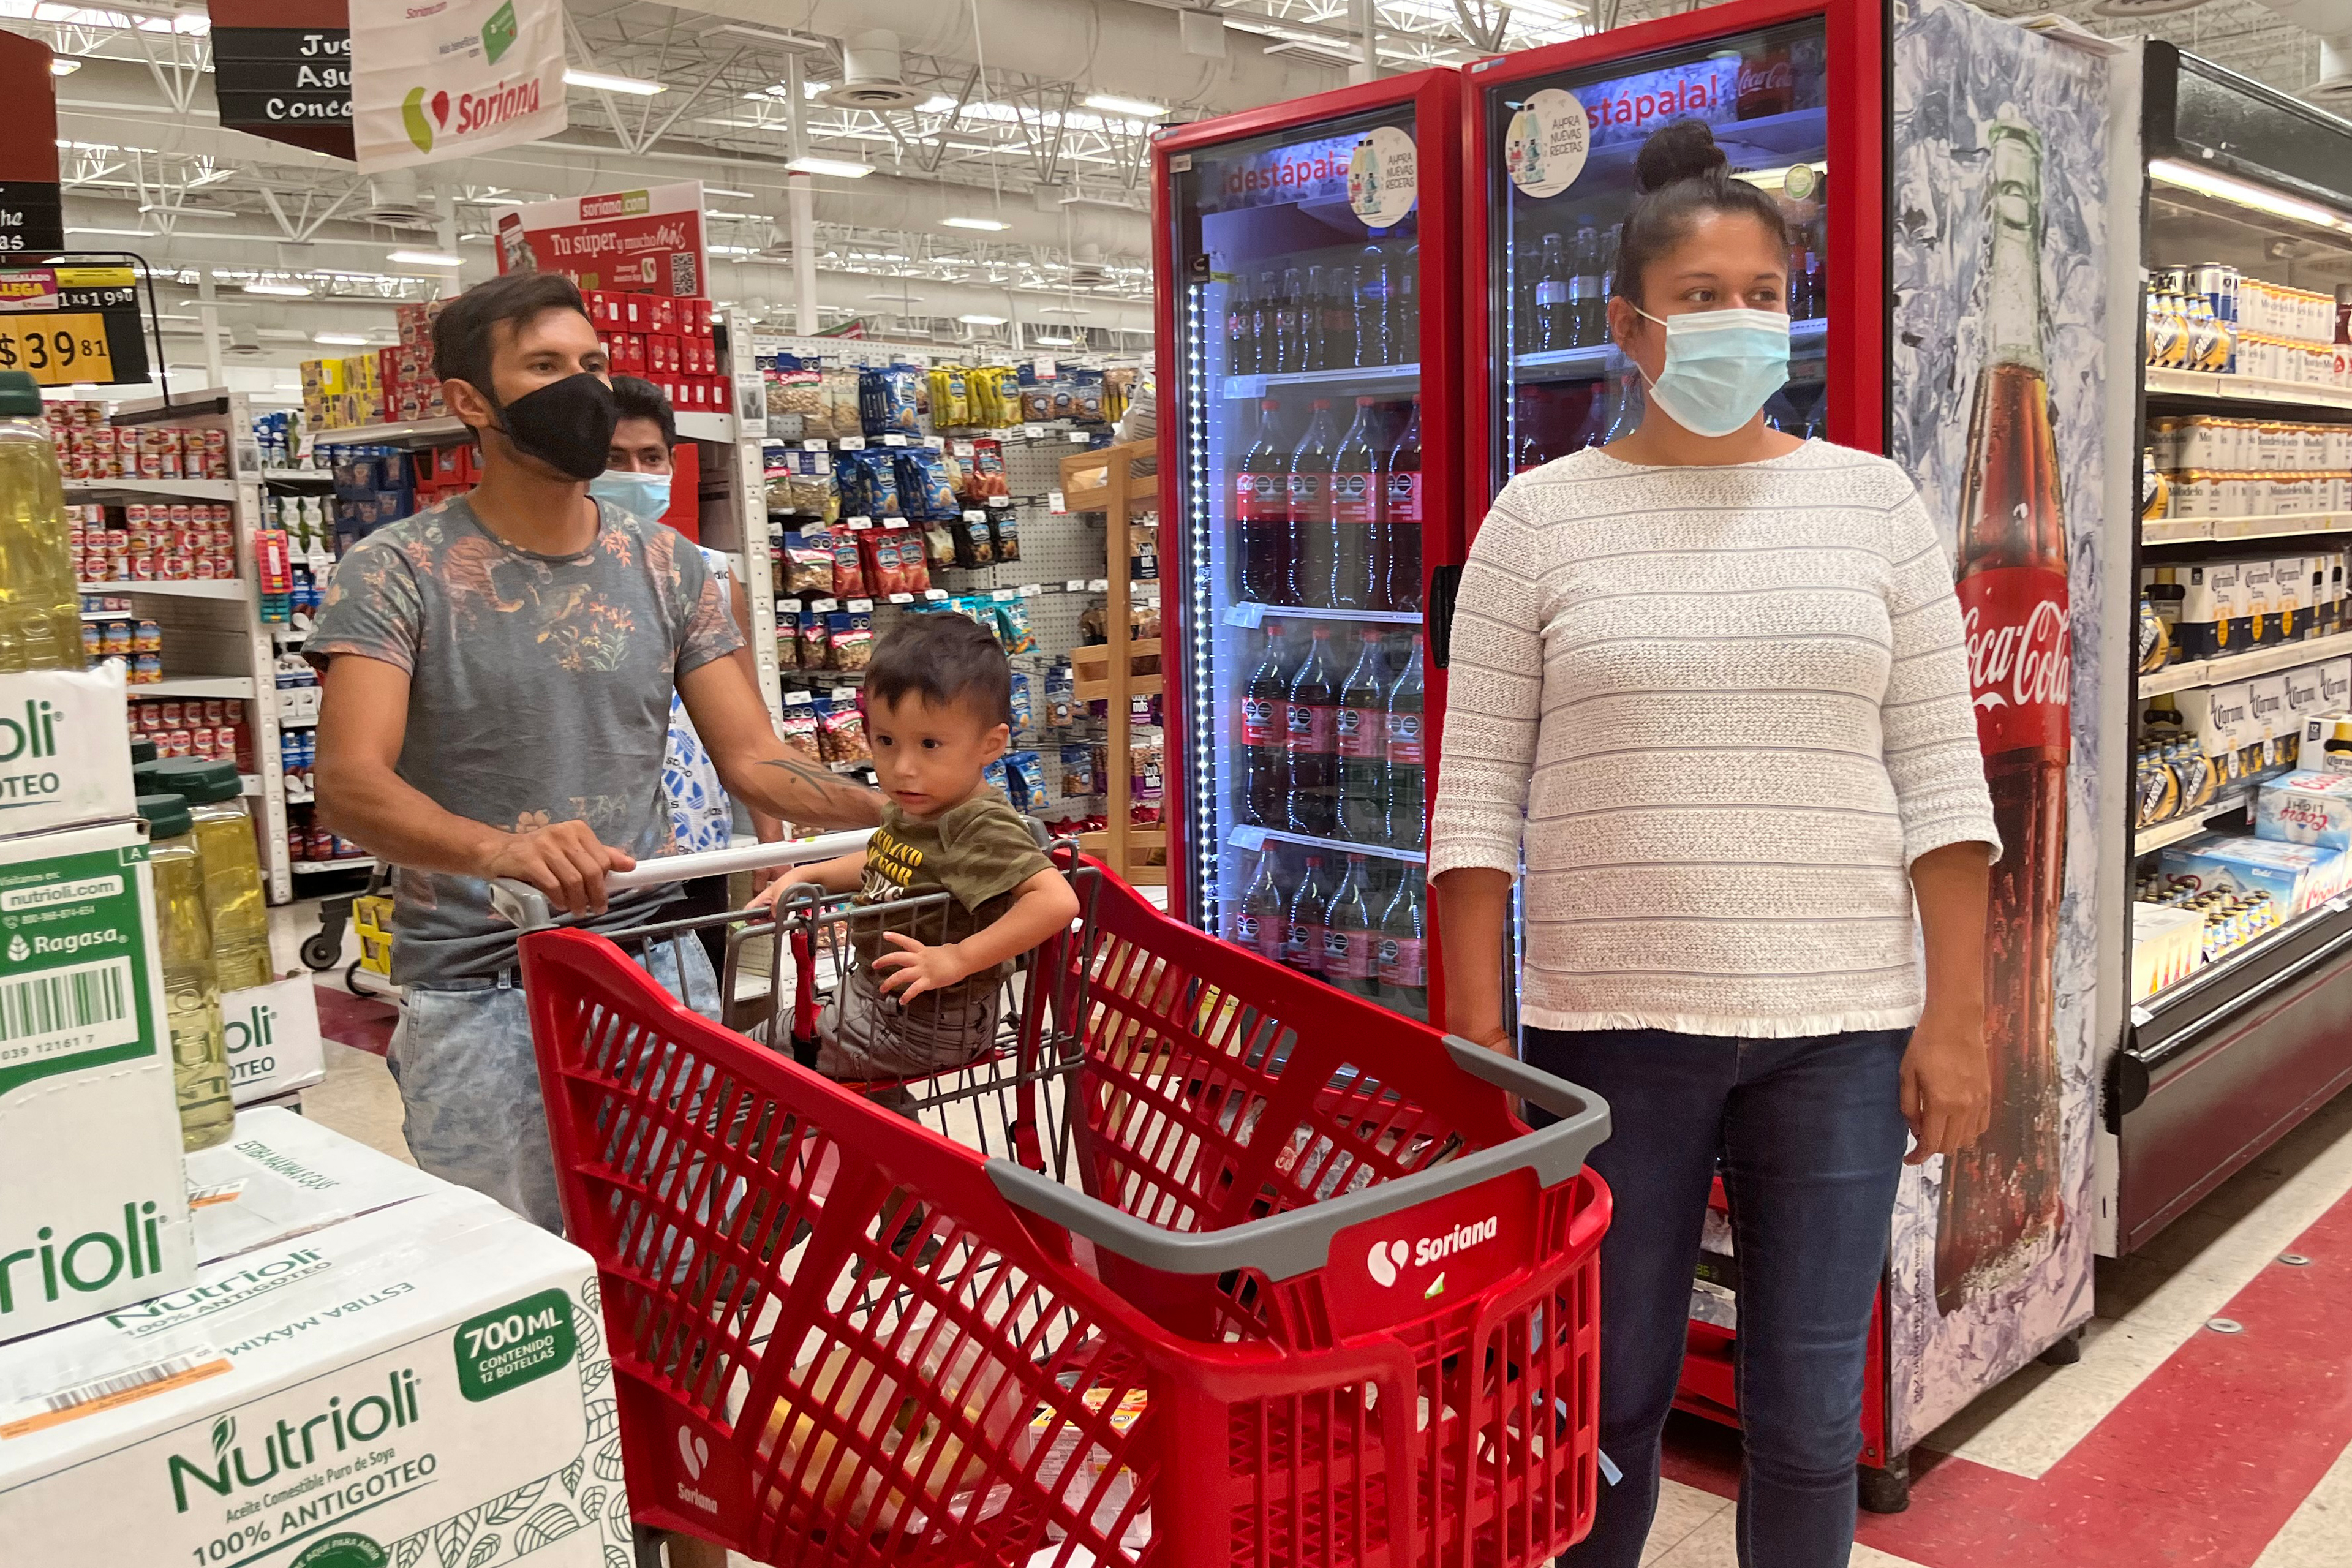 A photo shows Rosa Viridiana Ceron Alpizar inside a grocery store with her family.